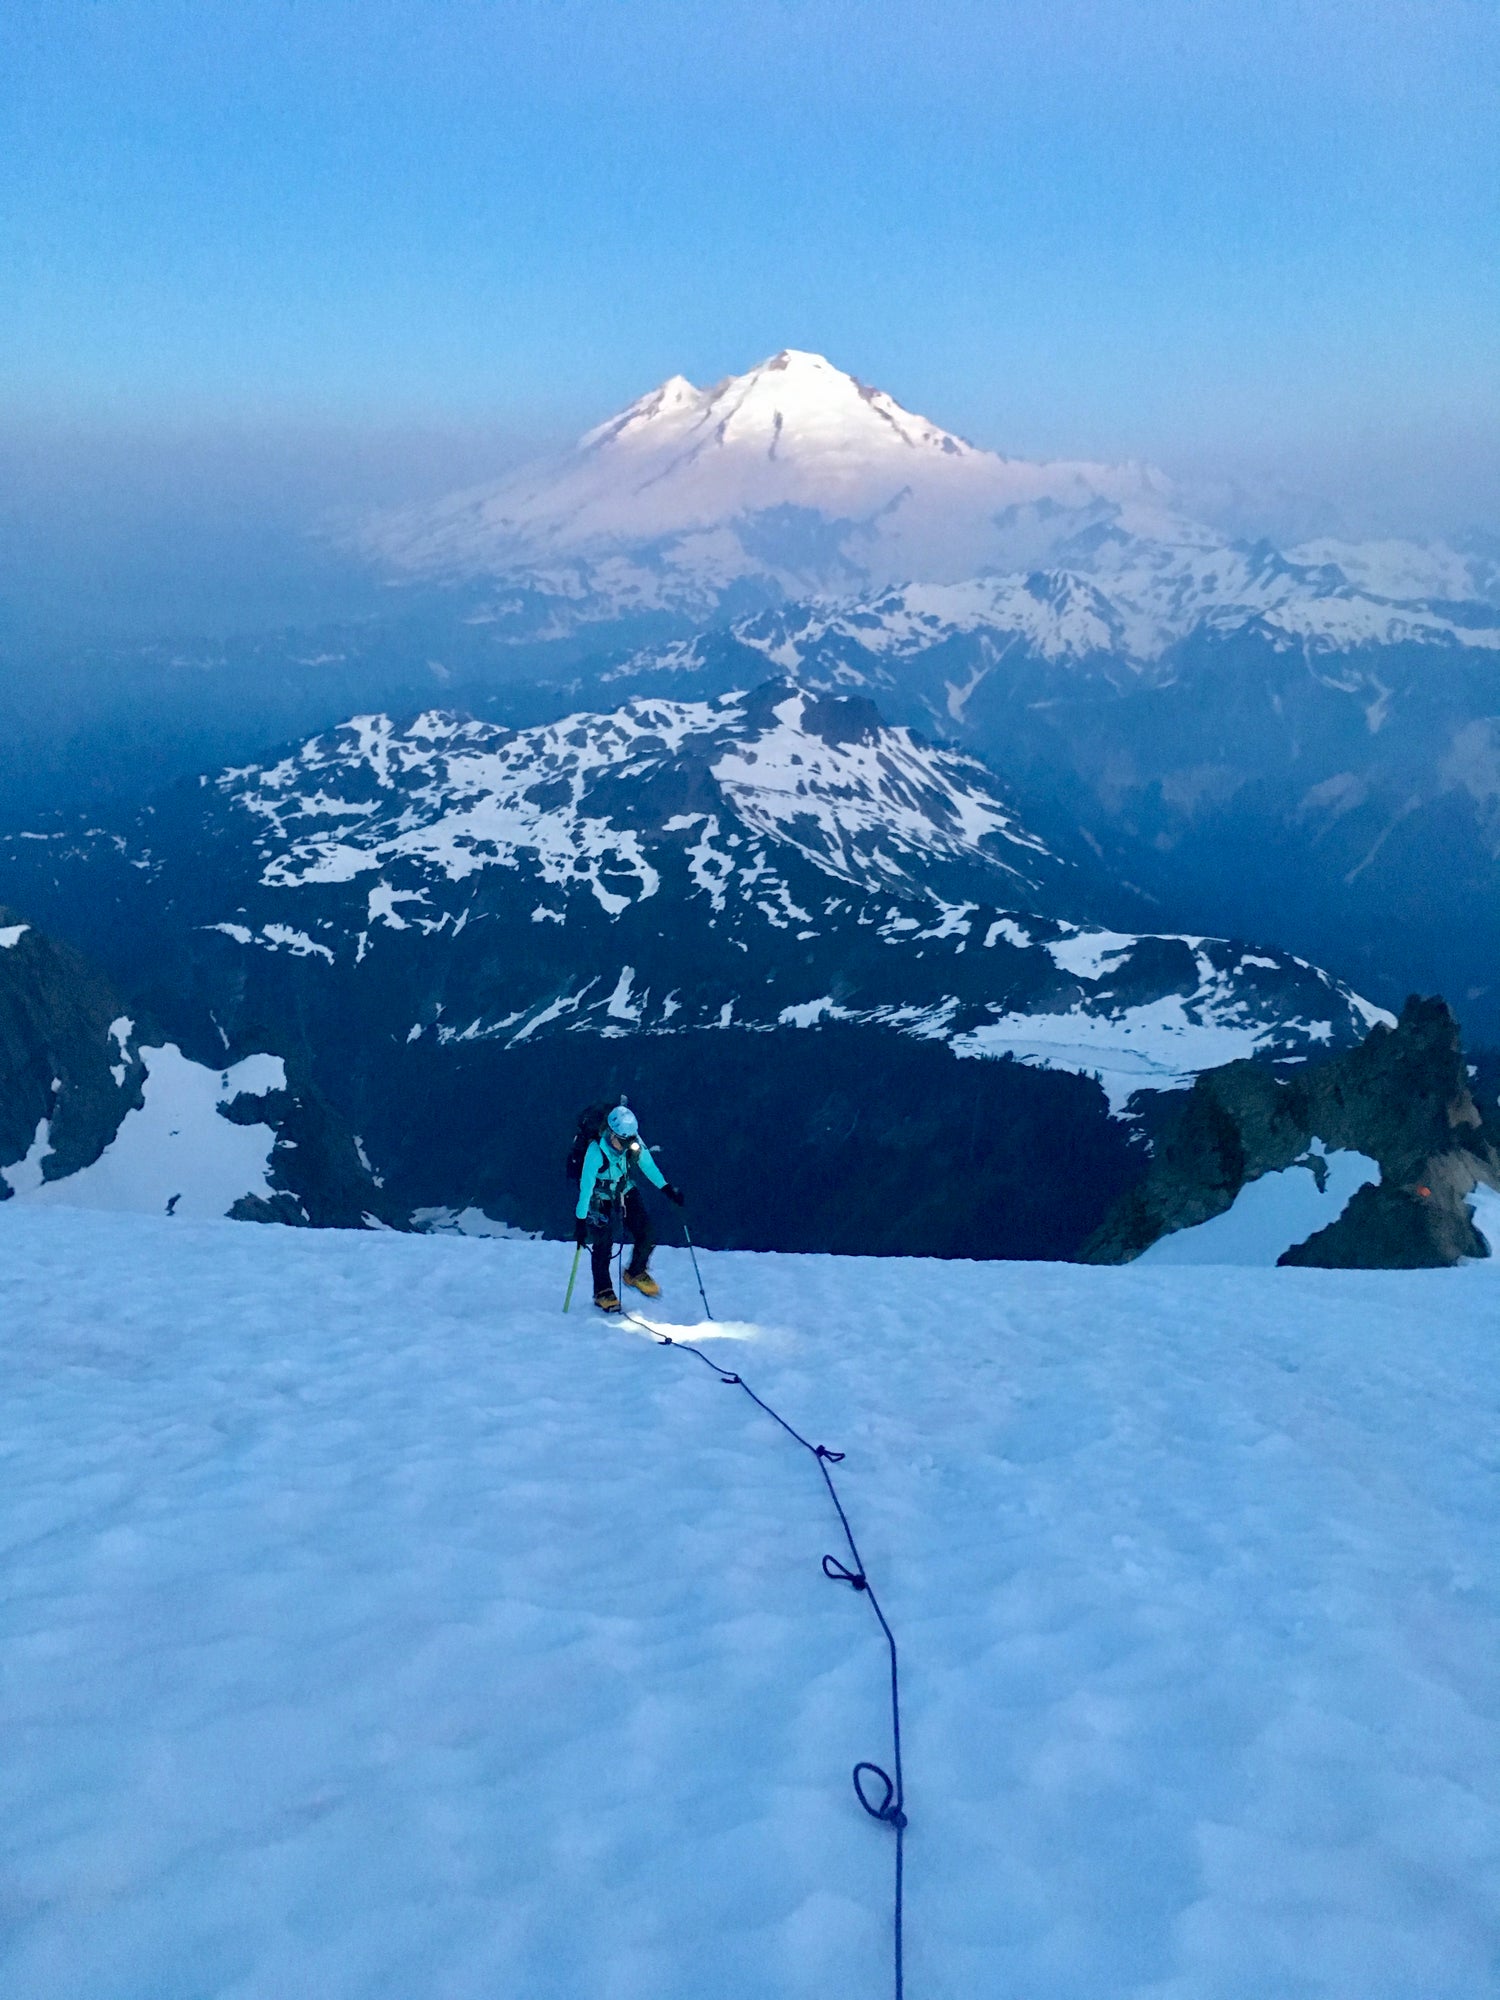 Walking up the sulphide glacier early in the morning, a light shadow of fog cloaks the lower mountains in the background, but Mount Baker rises above it. 